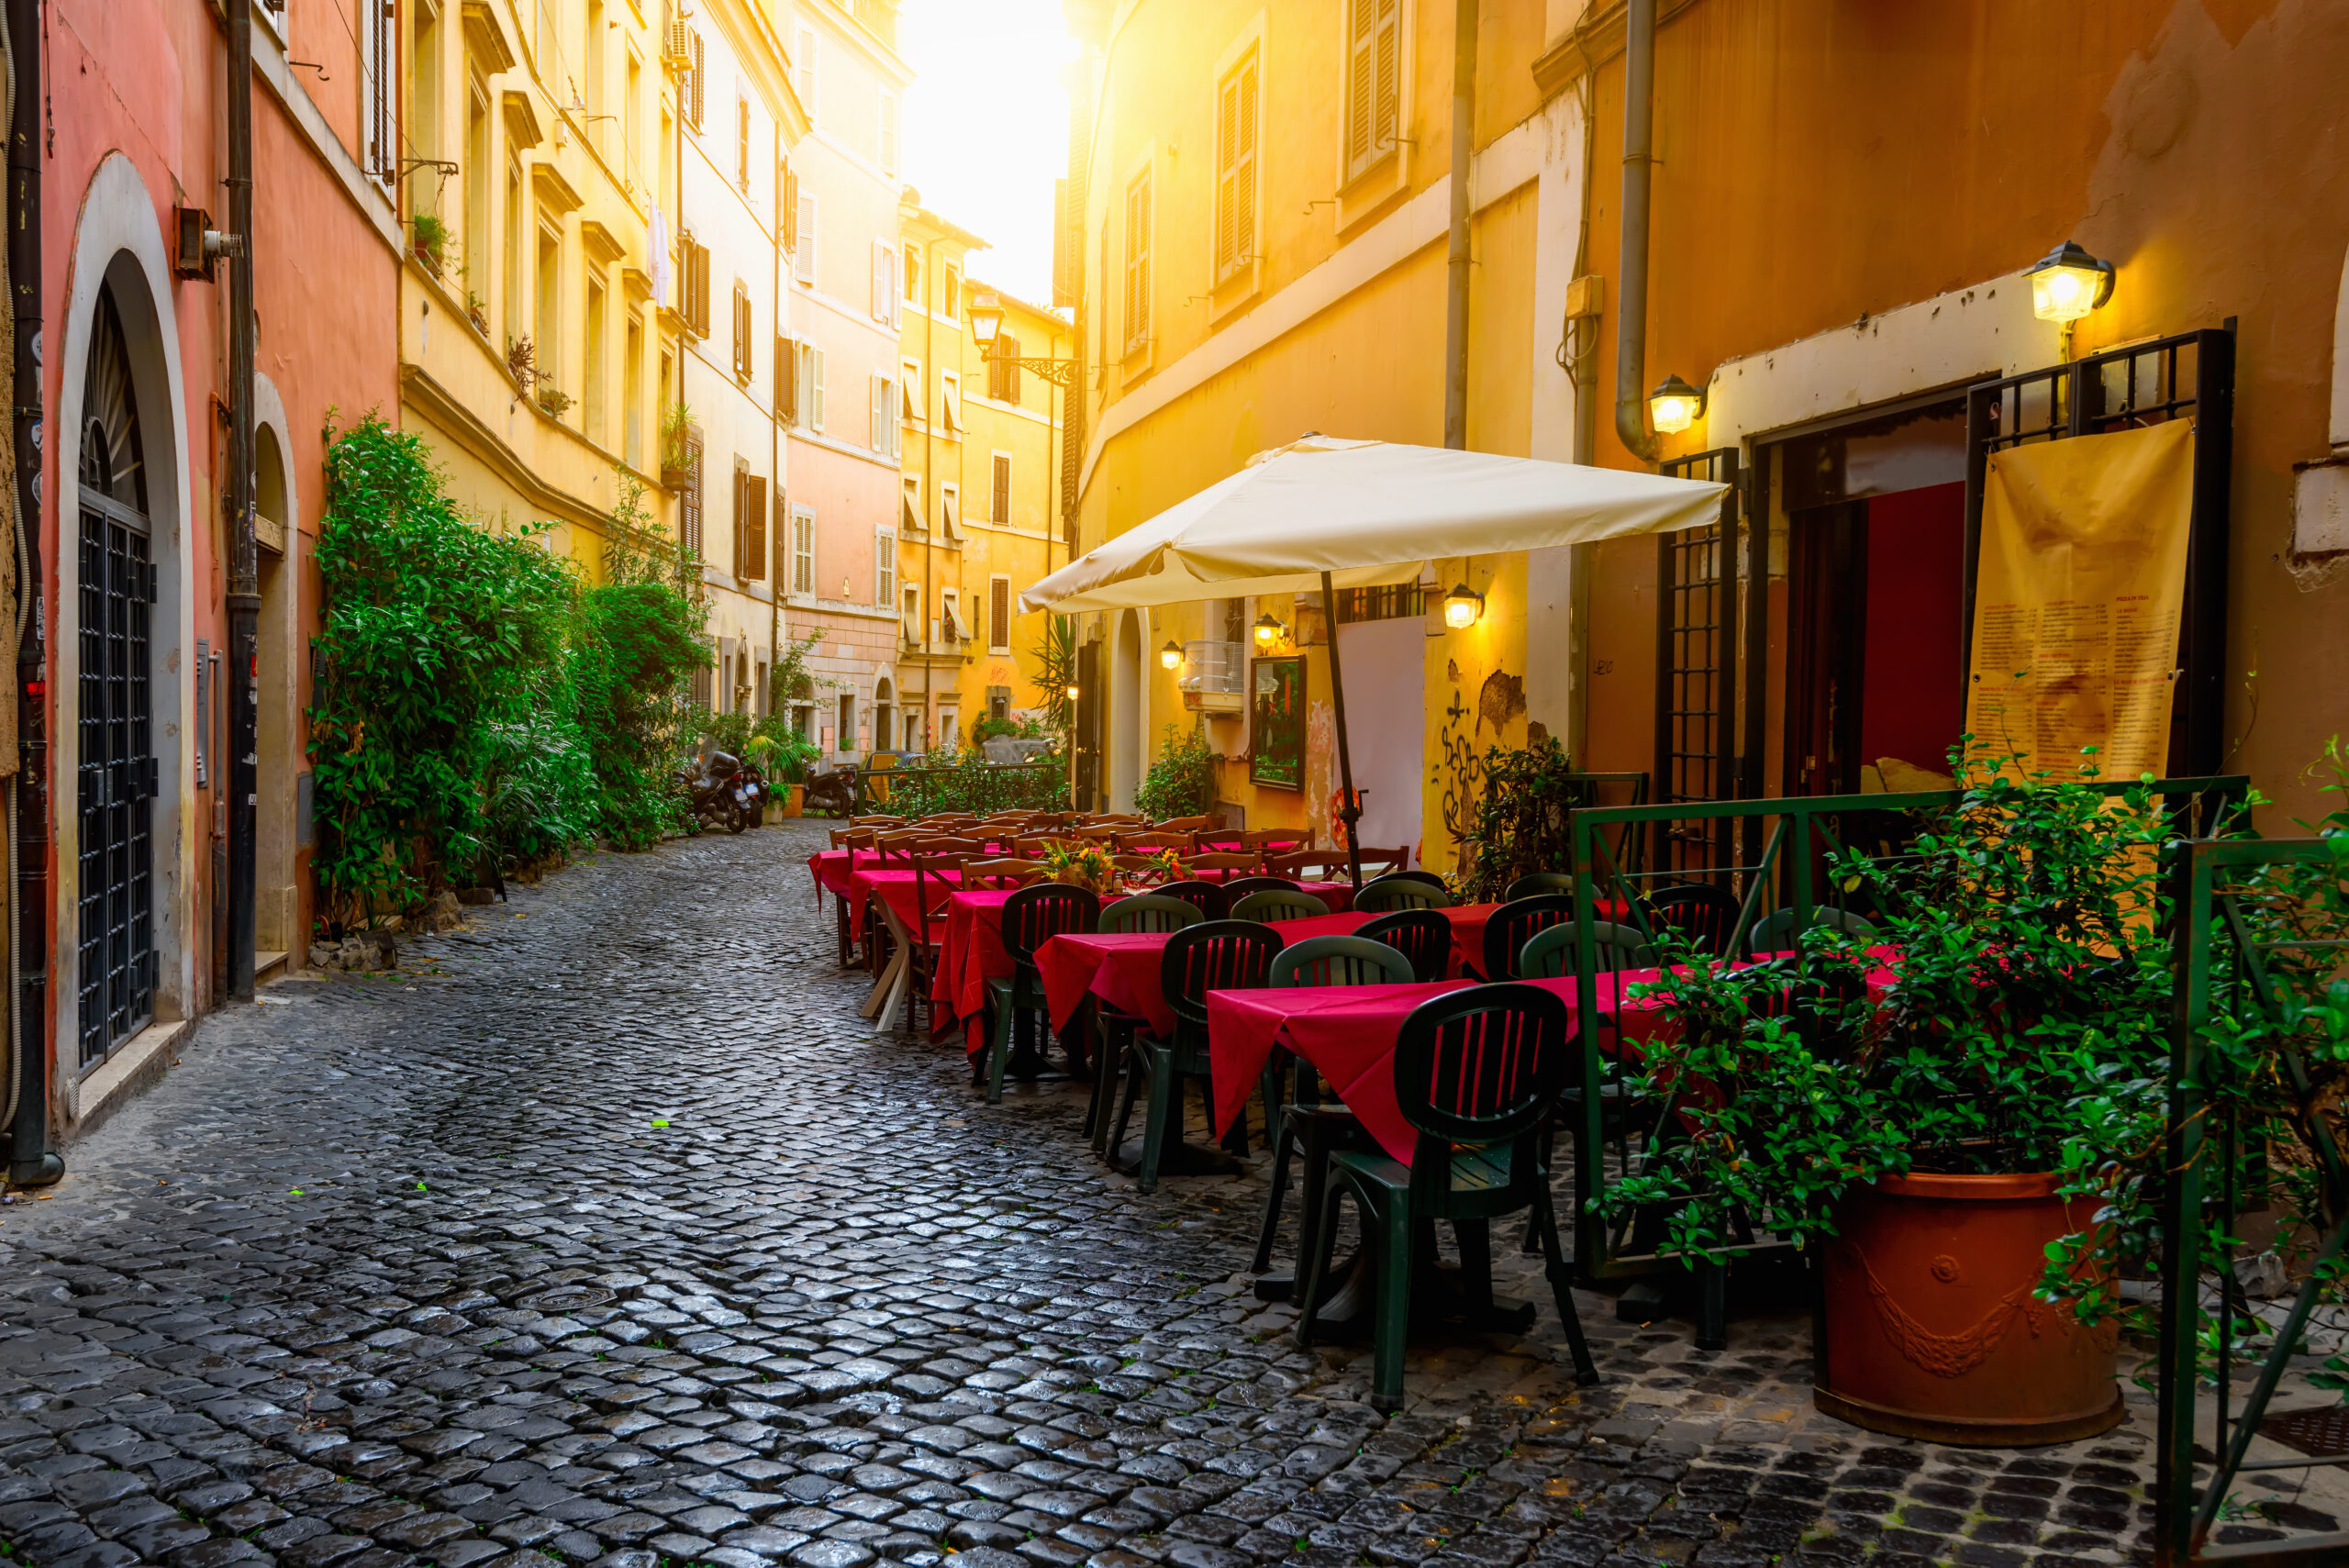 Scene of a picturesque outdoor dining area on the cobbled streets of Trastevere